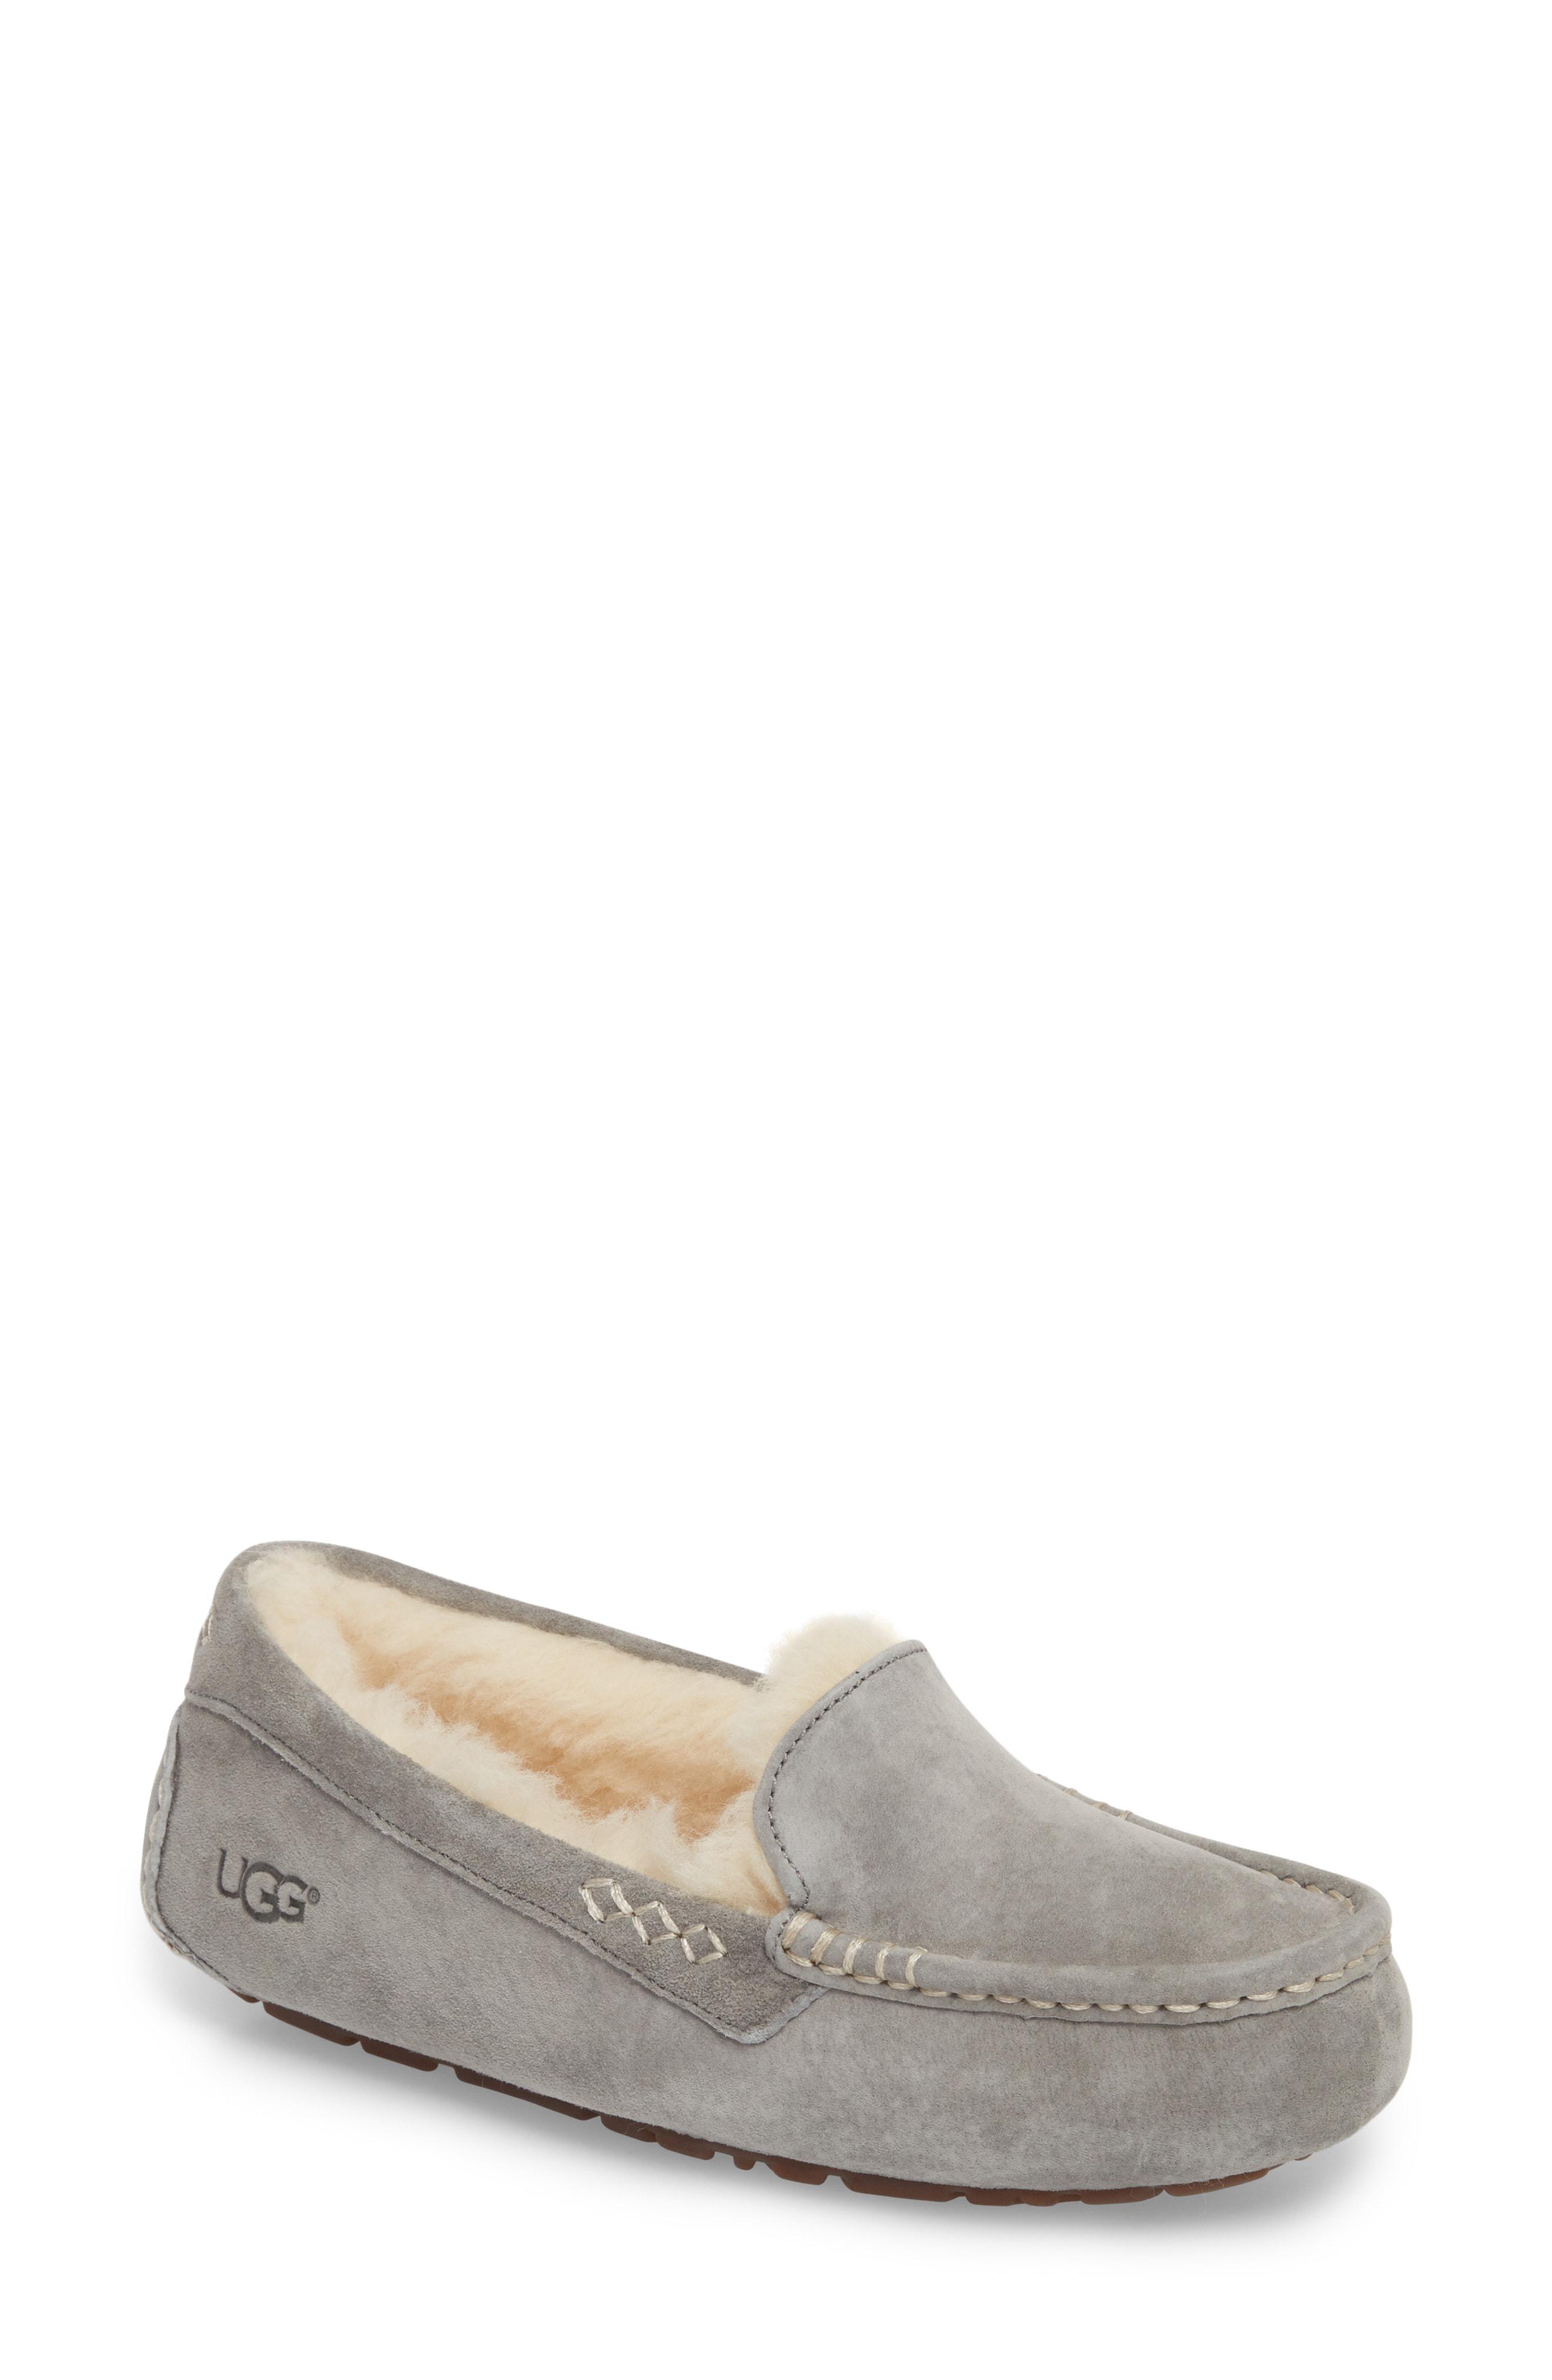 Lyst - UGG Ugg Ansley Water Resistant Slipper in Brown - Save 33%